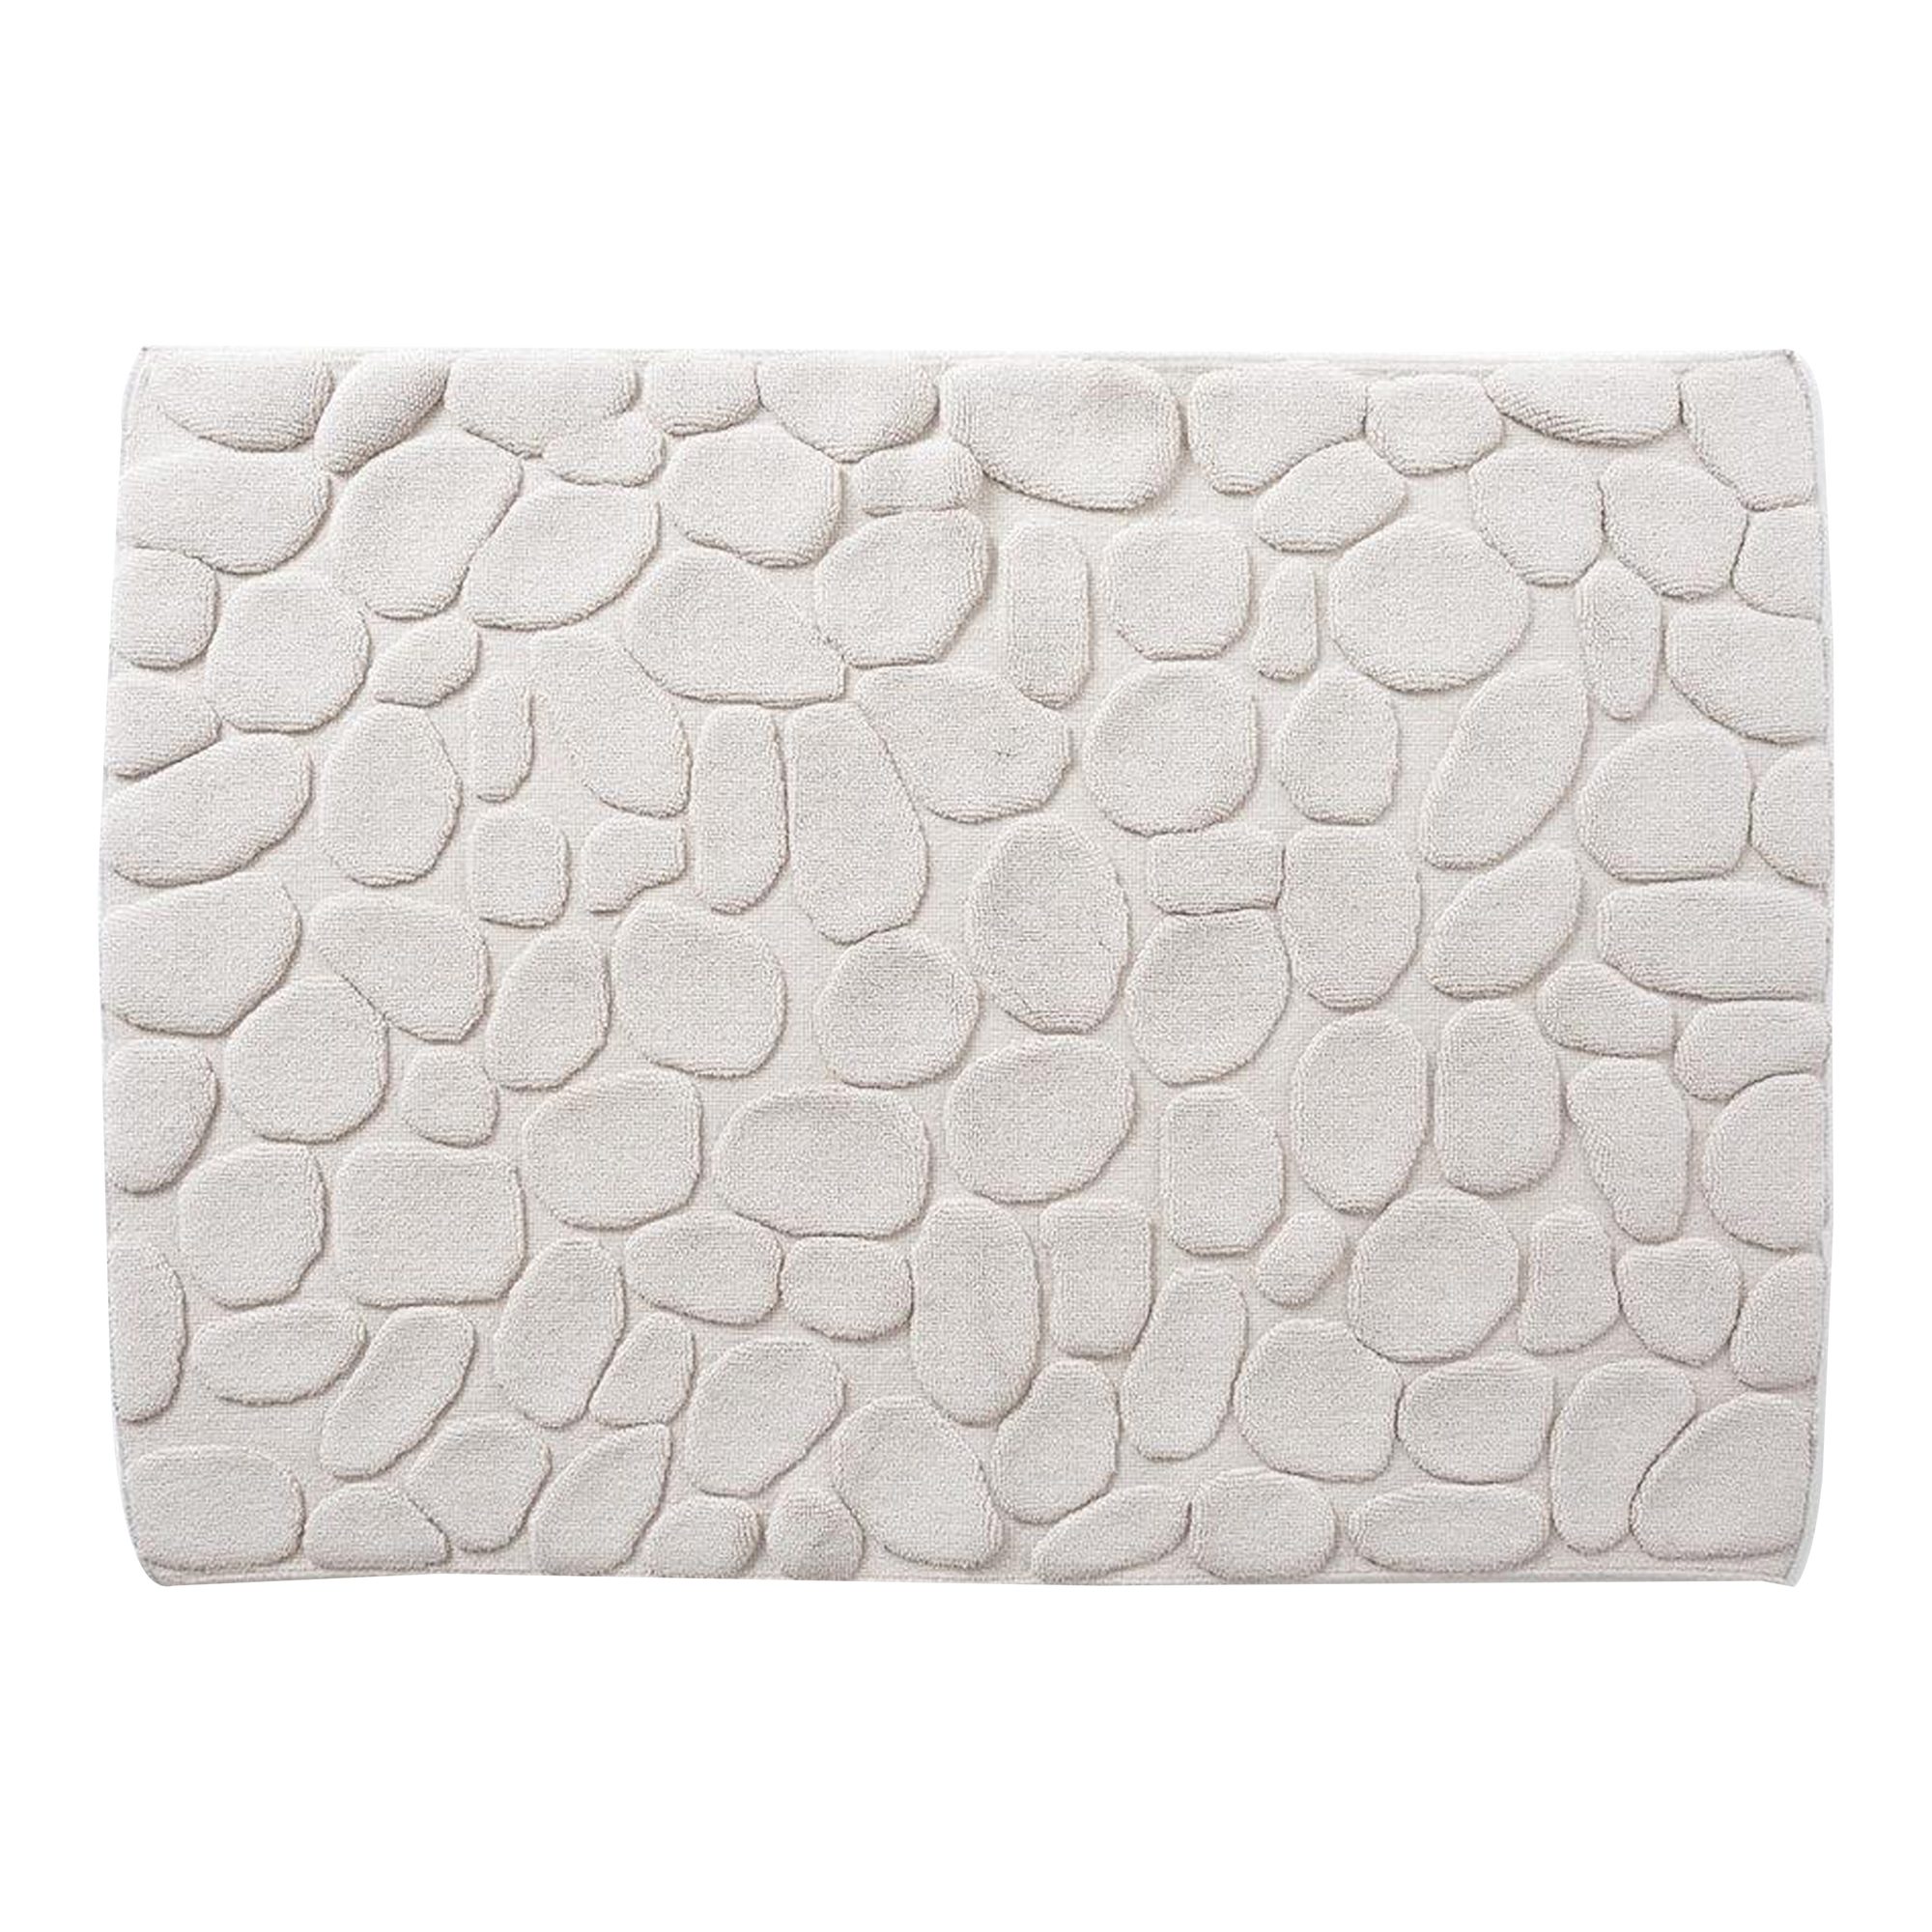 Inspired by the natural stones found in Japanese riverbeds, the Ishikoro Pebble Bath Mat was designed by Masaru Suzki and features a padded texture that feels great under your feet